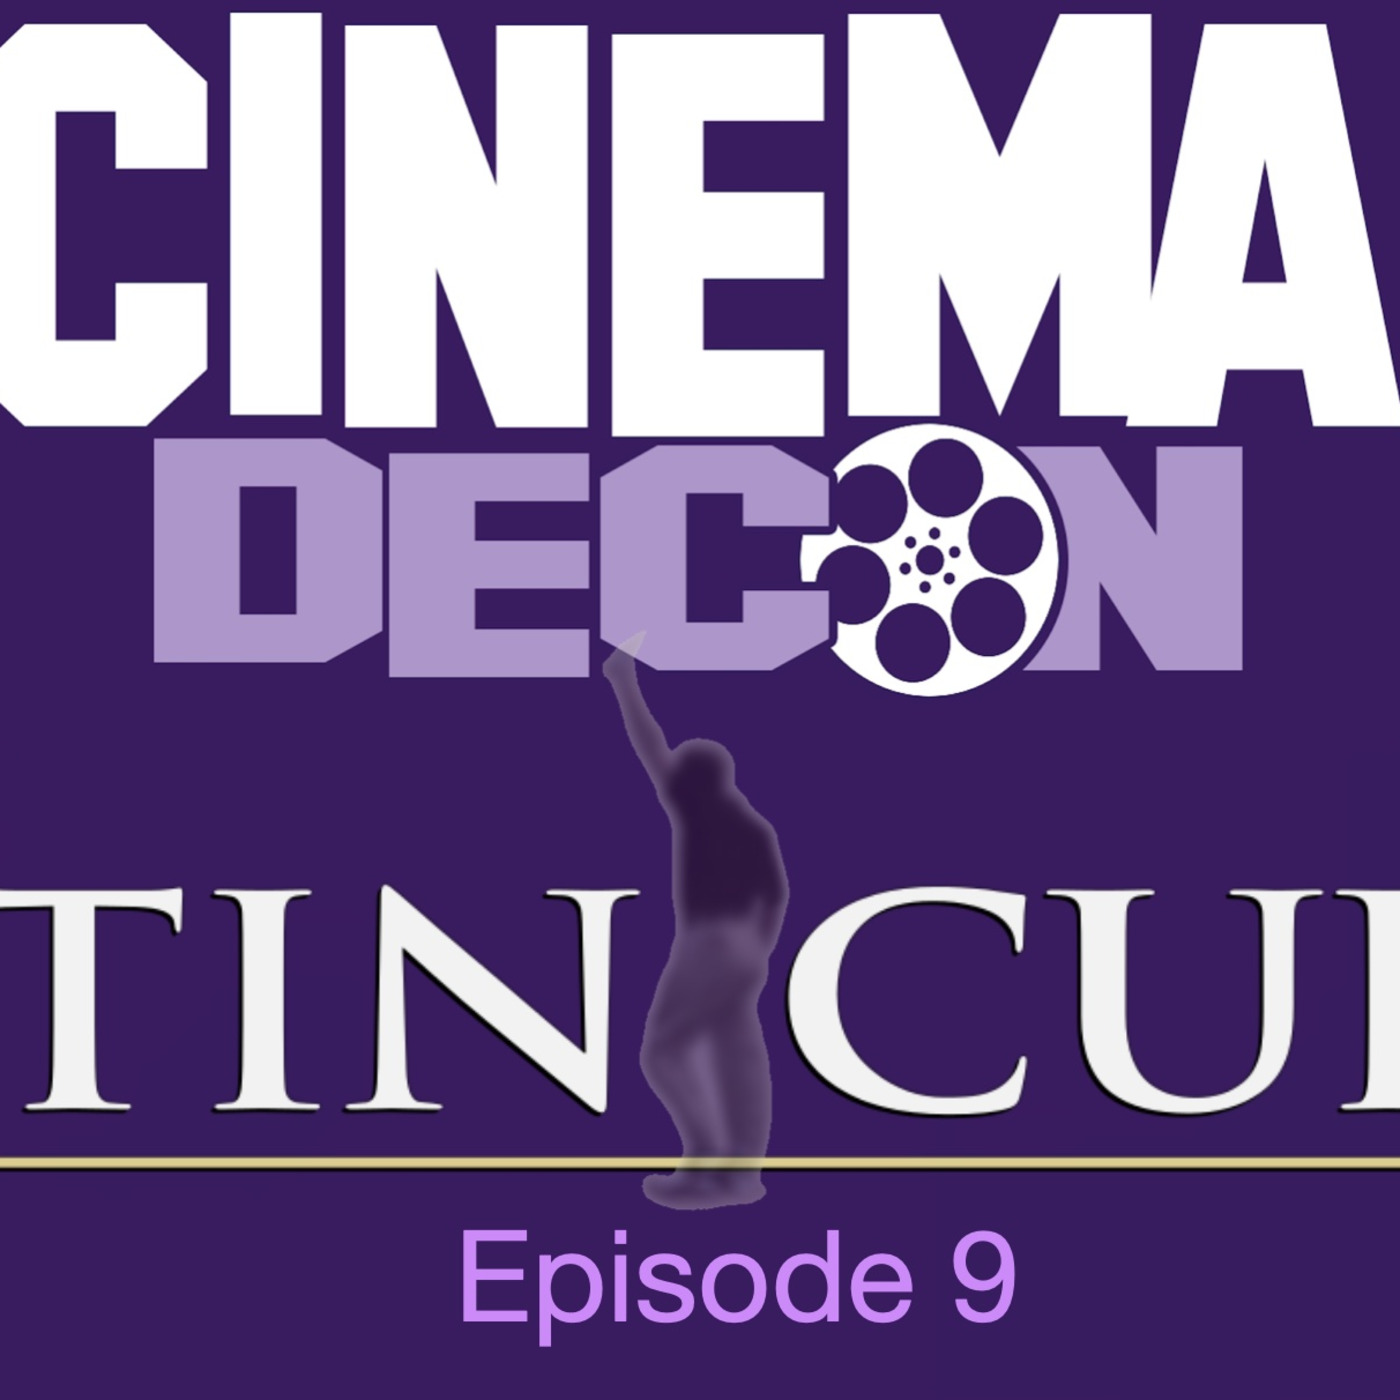 Episode 9: Tin Cup (1996) - Movie Review, Analysis, and Deconstruction